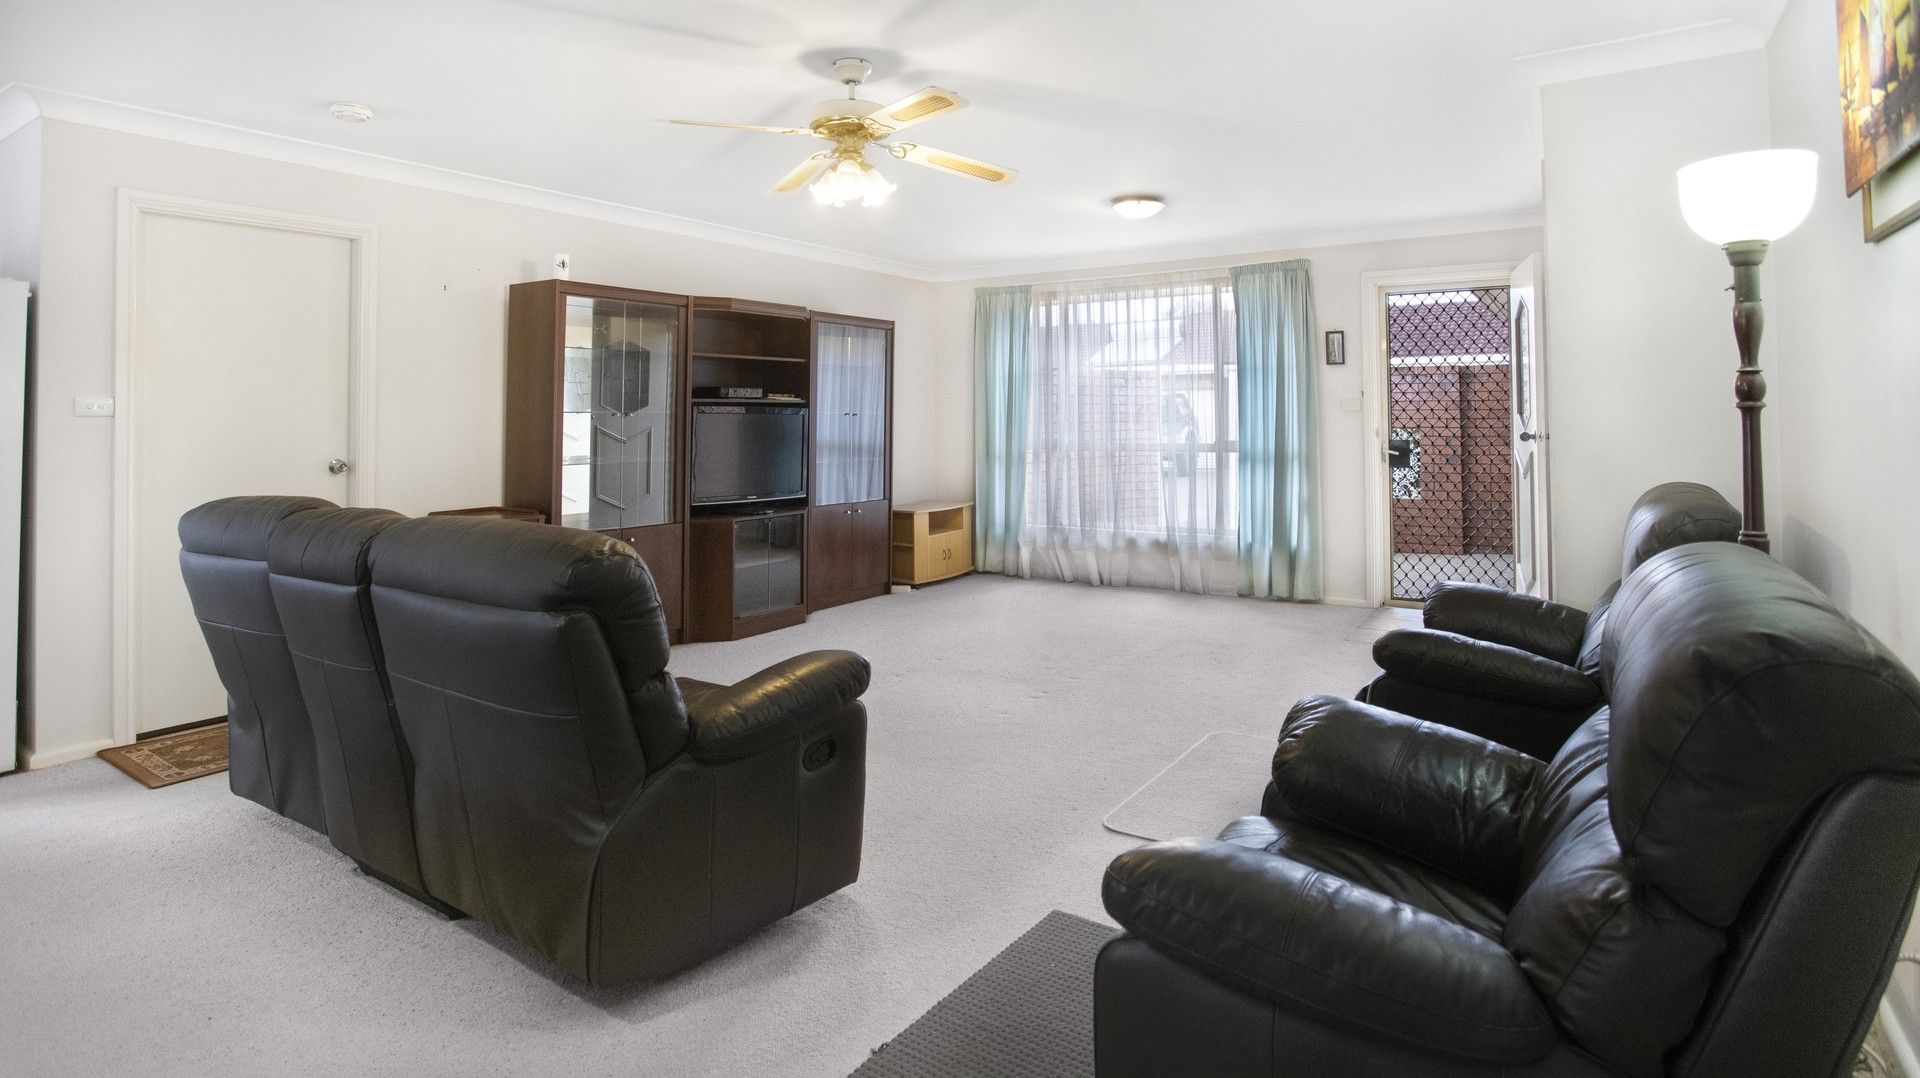 2 bedrooms Apartment / Unit / Flat in 9/24 Plover Street TAREE NSW, 2430